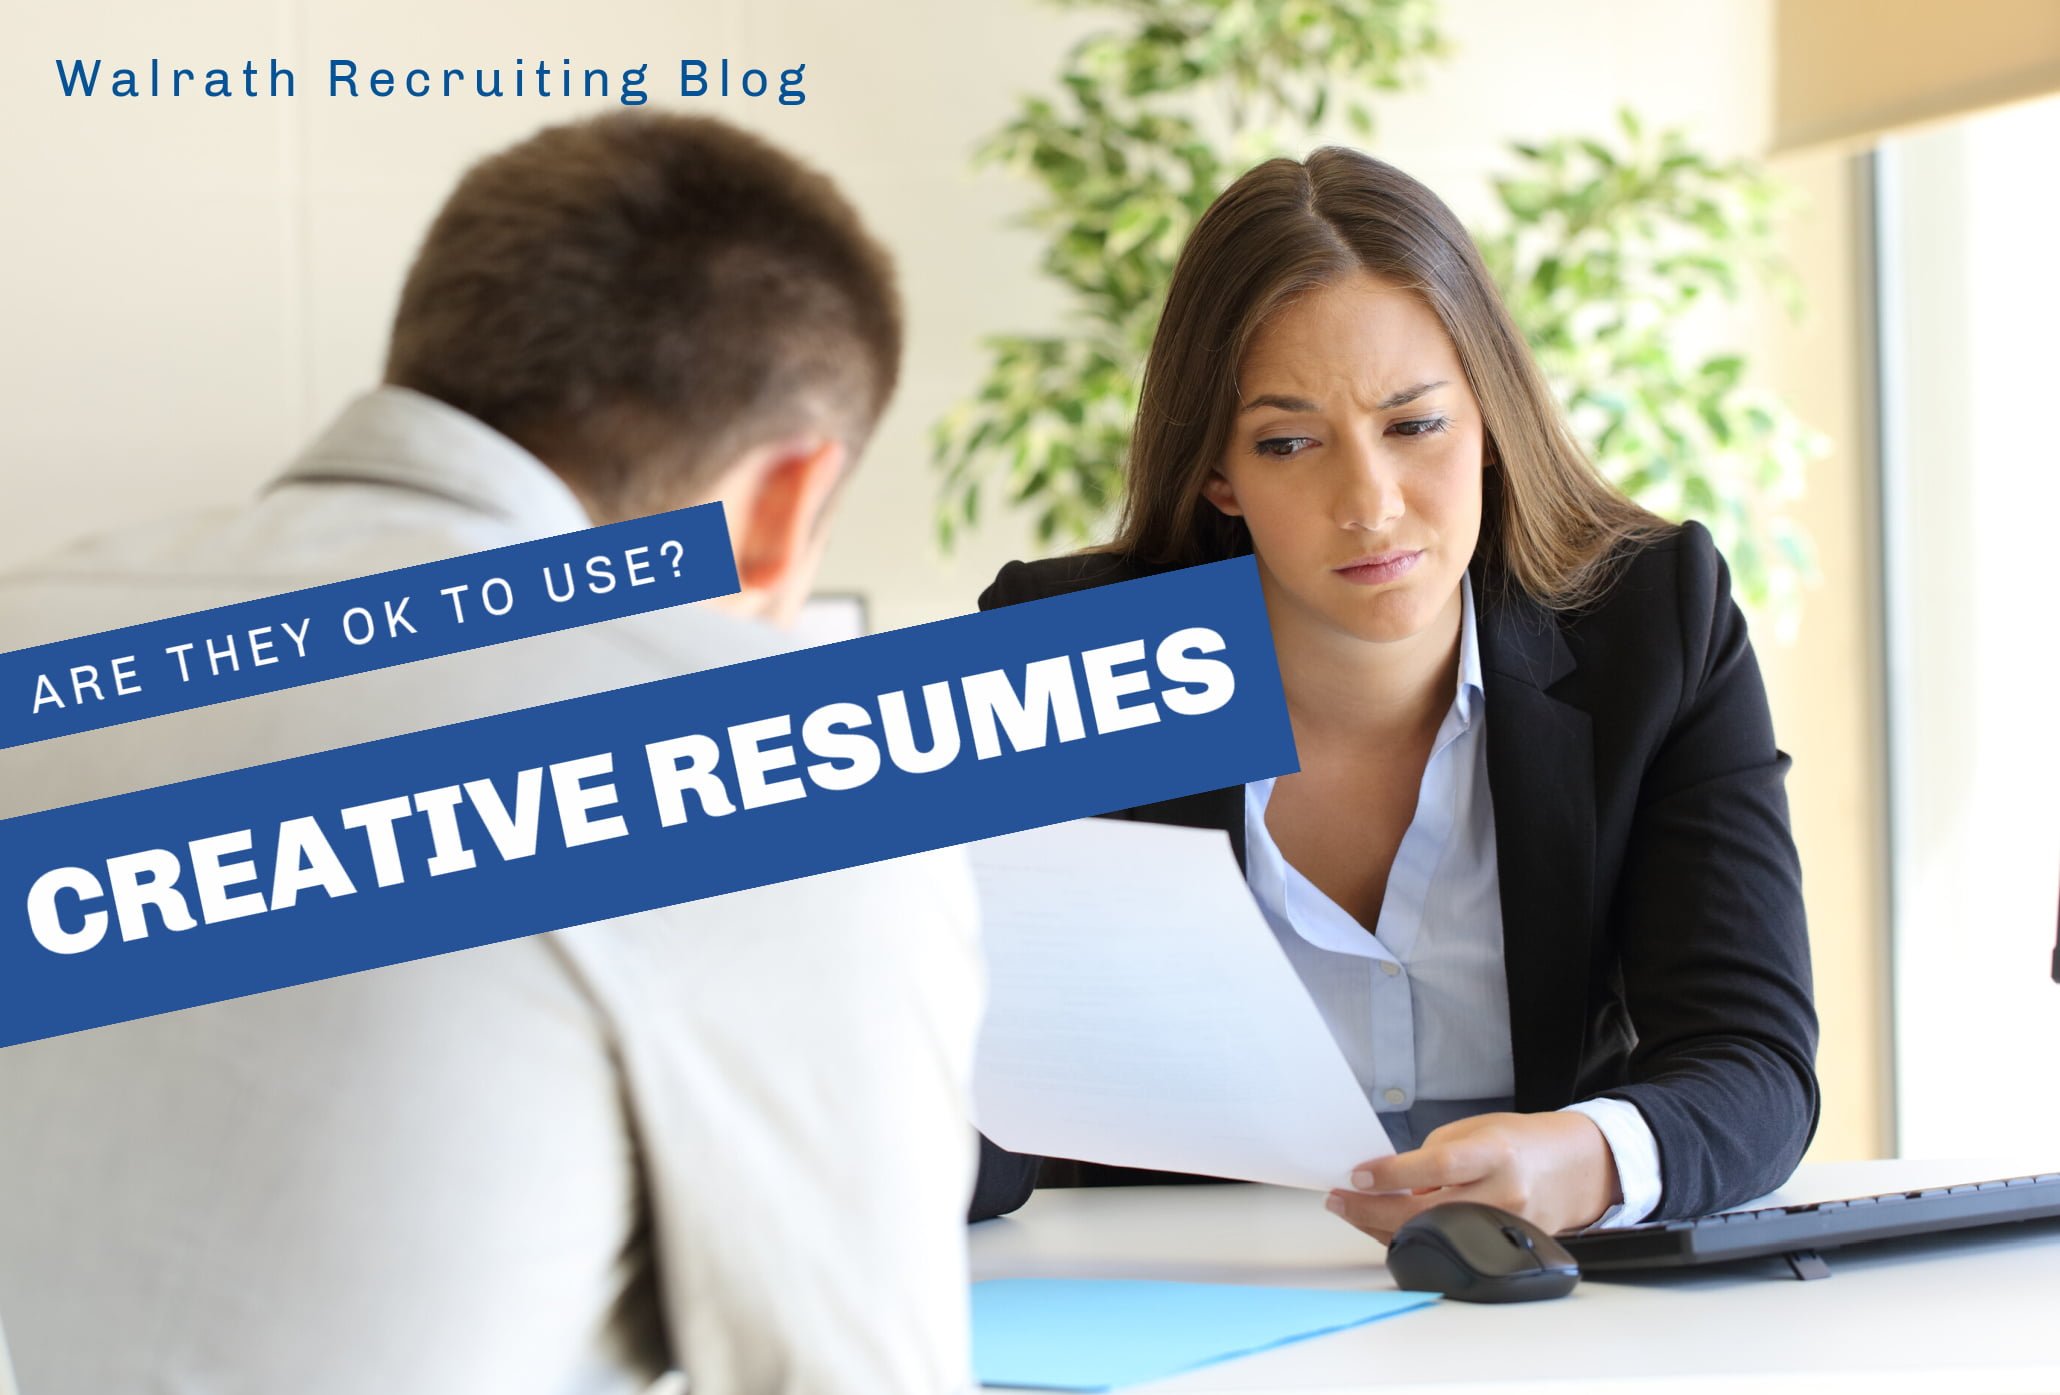 Creative resumes can be a great way to show off your skills in some cases. Find out when!